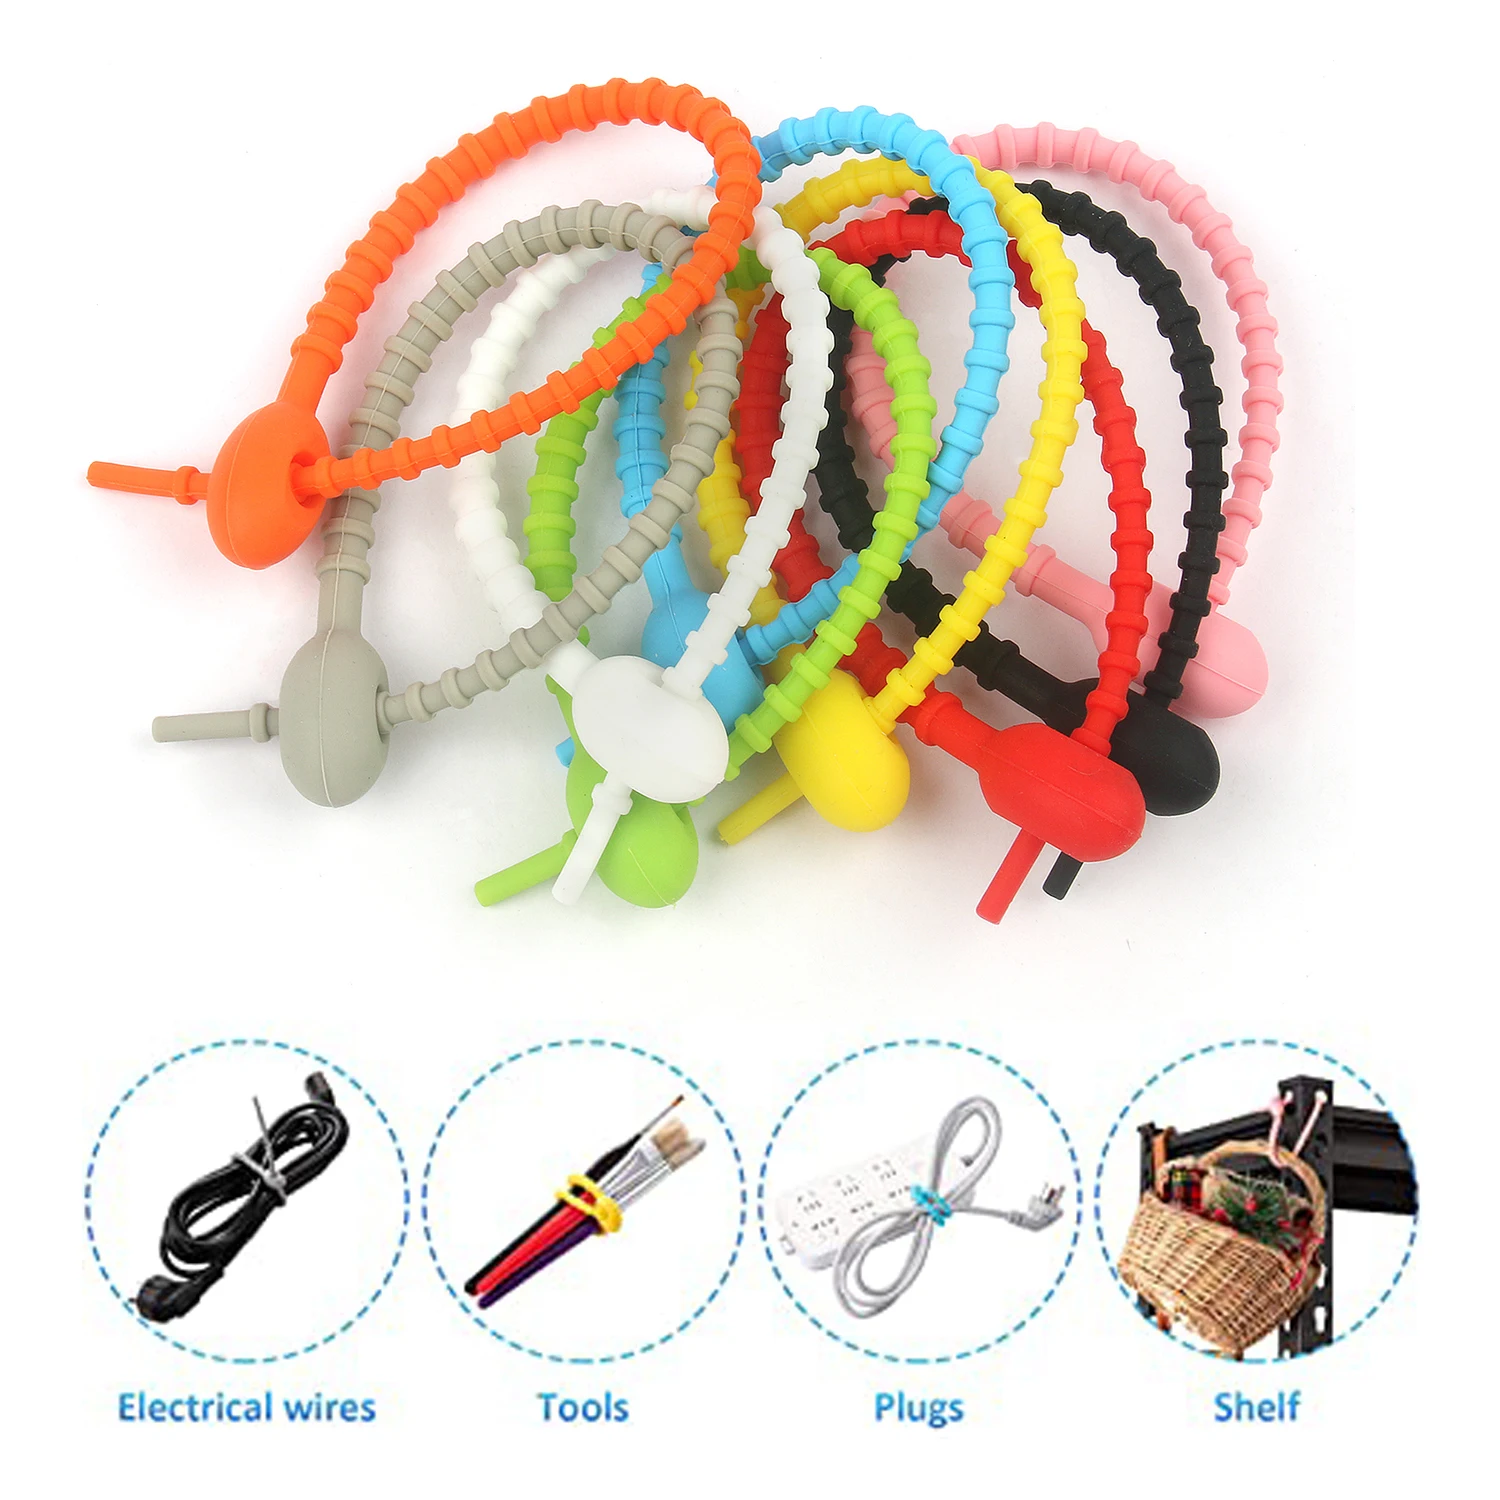 

10Pcs Silicone Self-Locking Wire Cable Zip Ties Multi-functional Reusable Cable Ties Organiser Fasten Cable Food Bag Bundle Tool